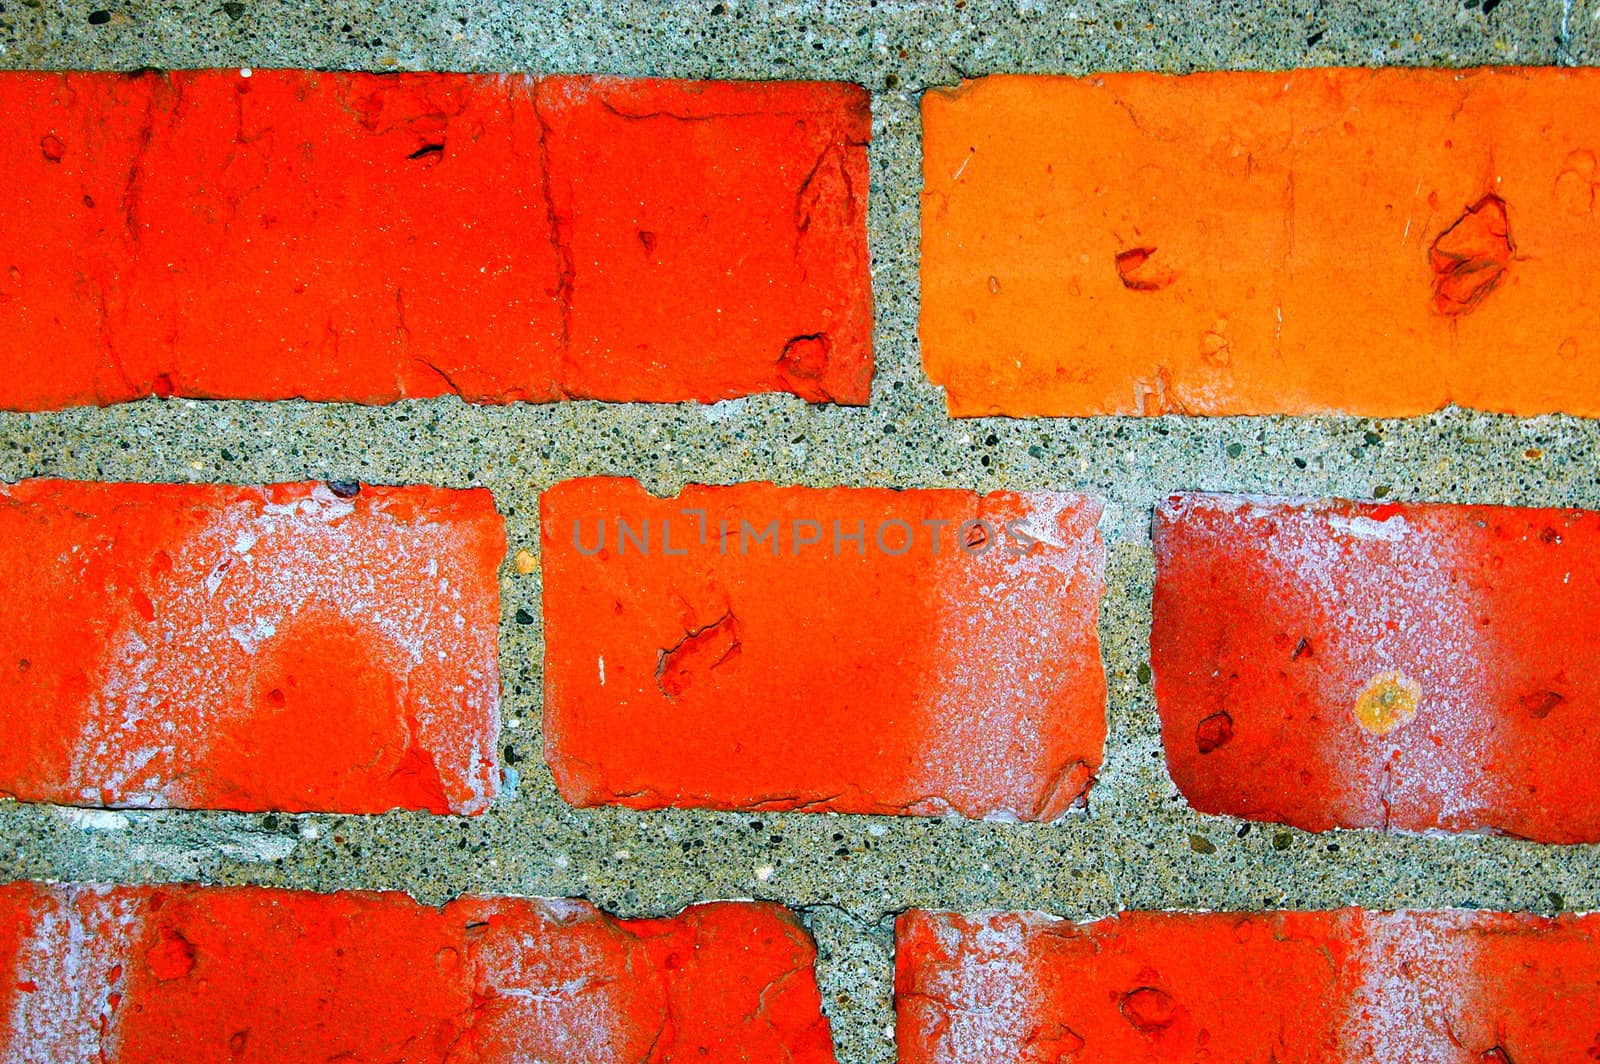 Red brick wall on a building exterior.